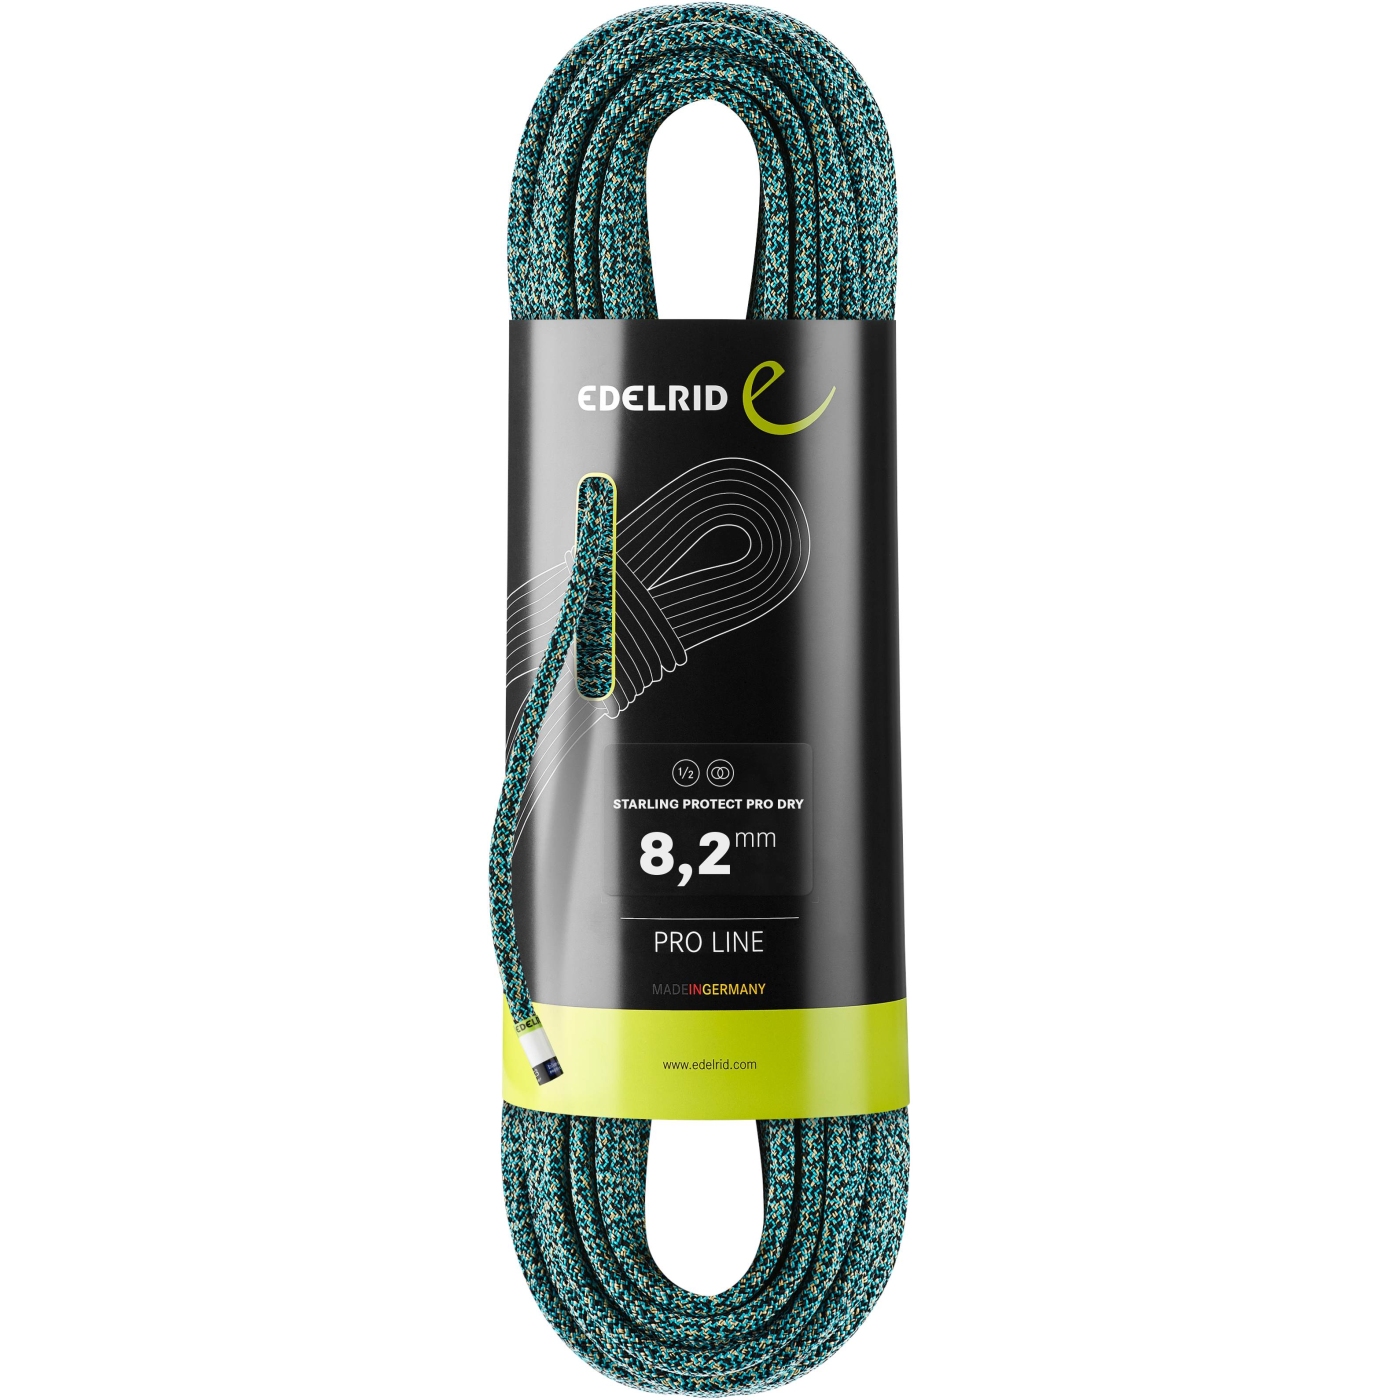 Productfoto van Edelrid Starling Protect Pro Dry 8,2mm Touw - 60m - icemint-night